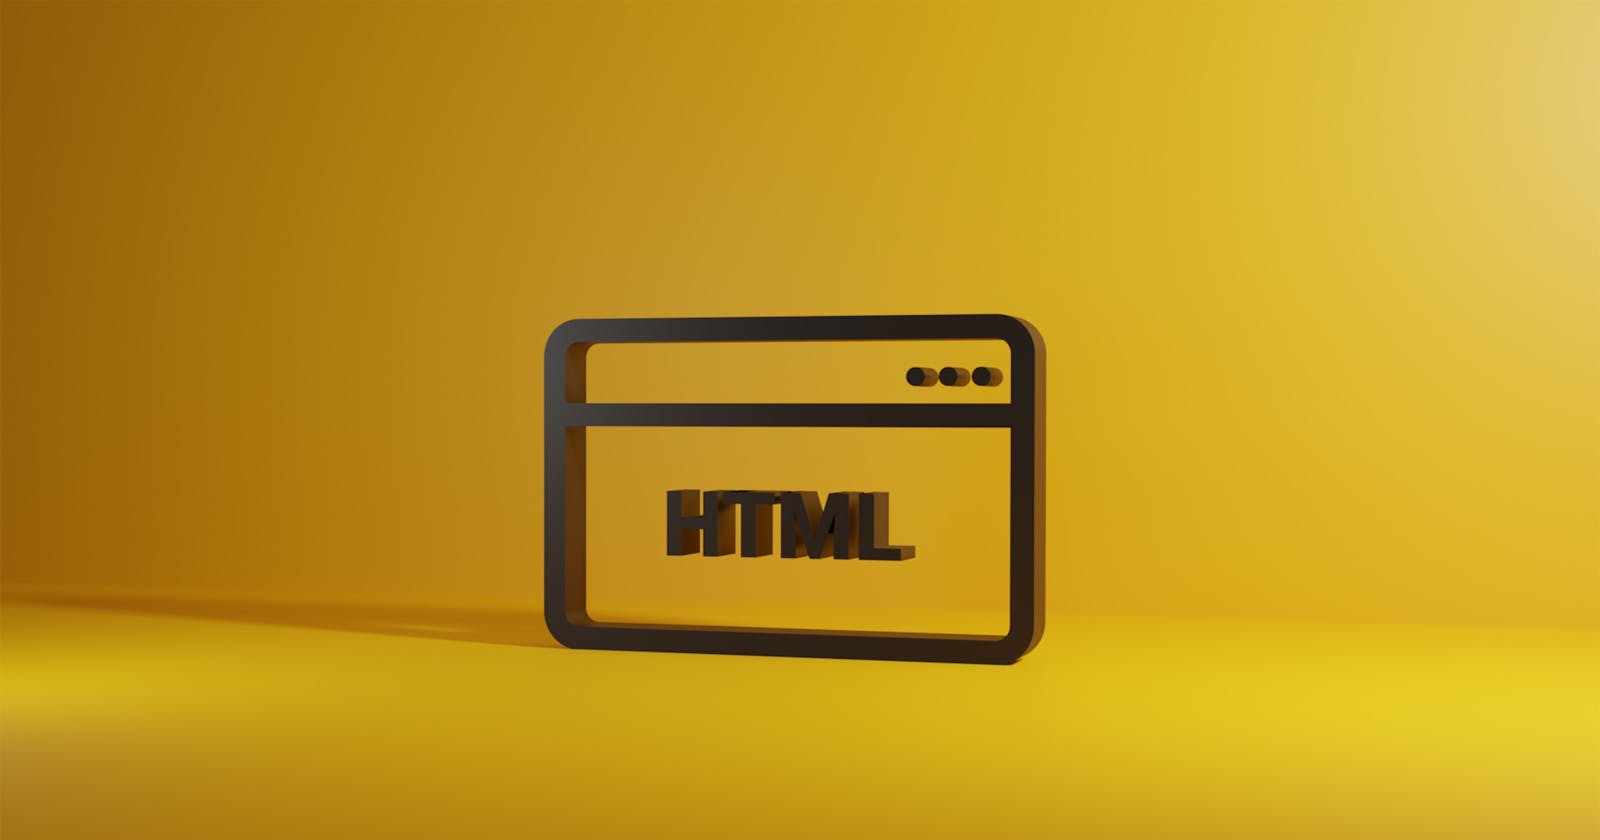 Html For Everyone